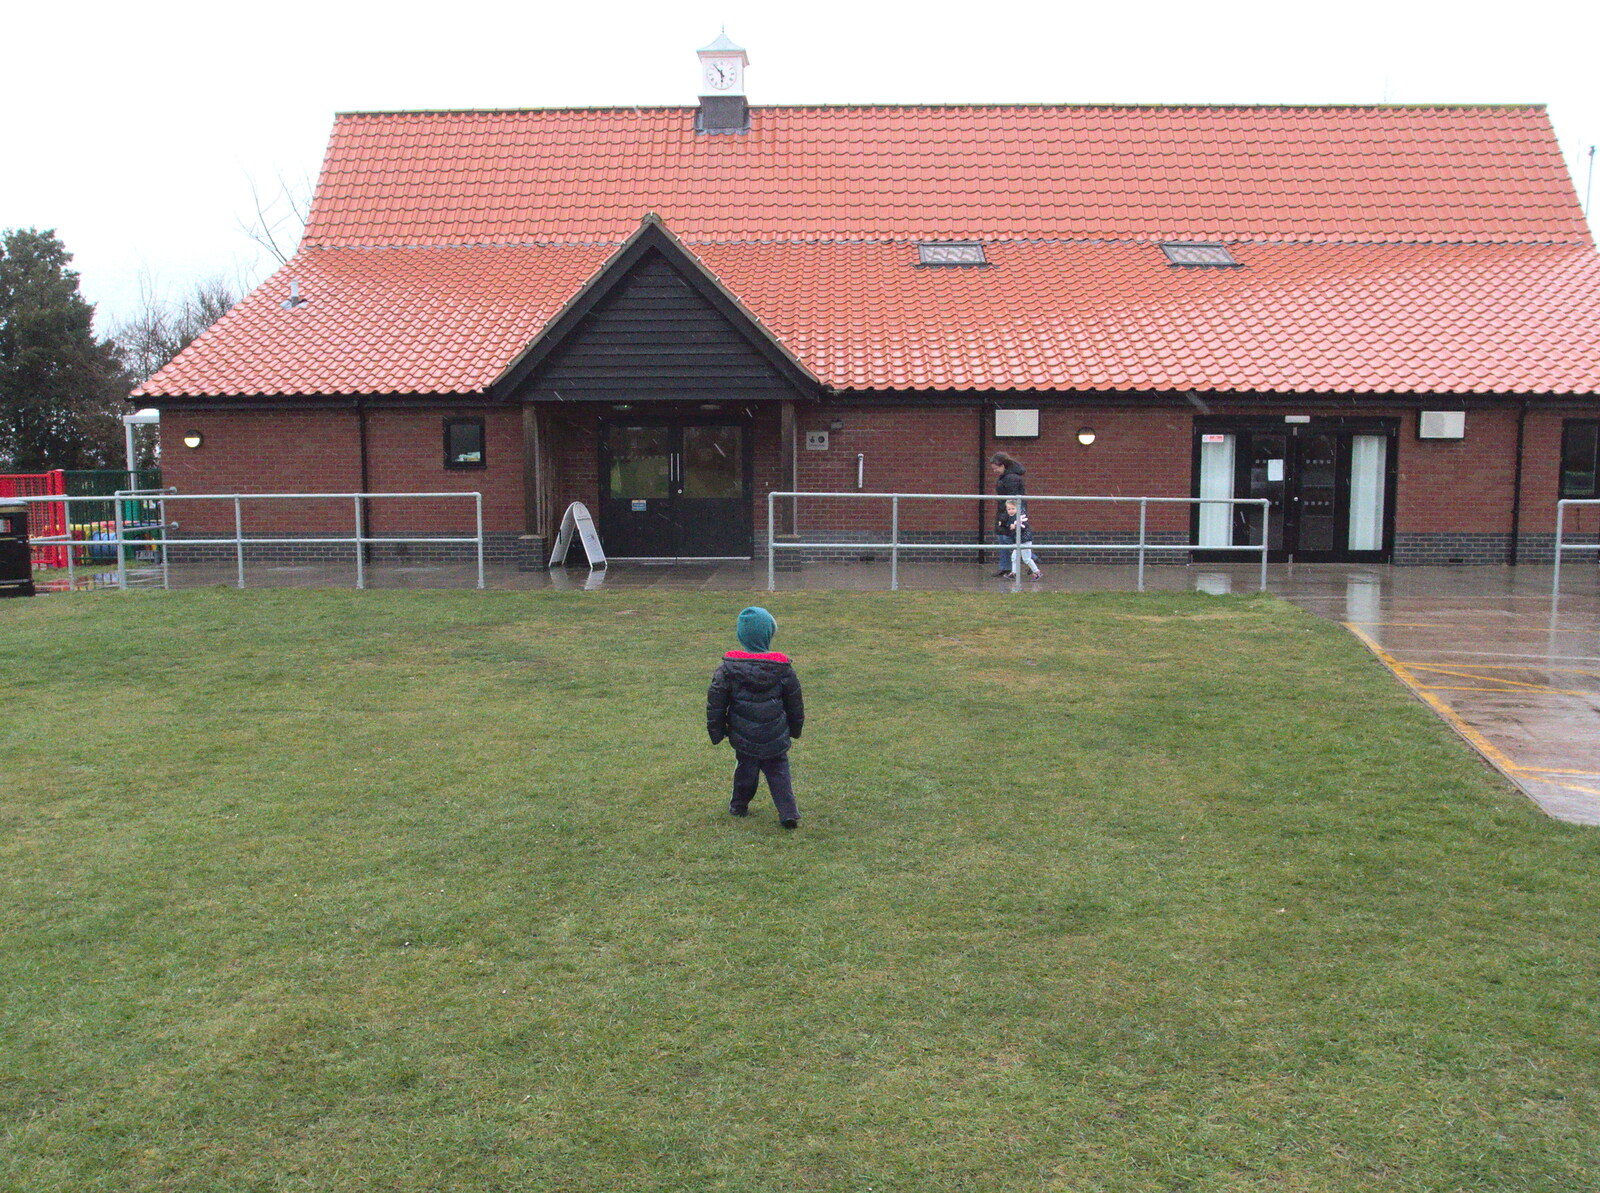 Harry heads to Occold village hall from The Last Day of Pre-School and Beer at the Trowel and Hammer, Cotton, Suffolk - 29th March 2015